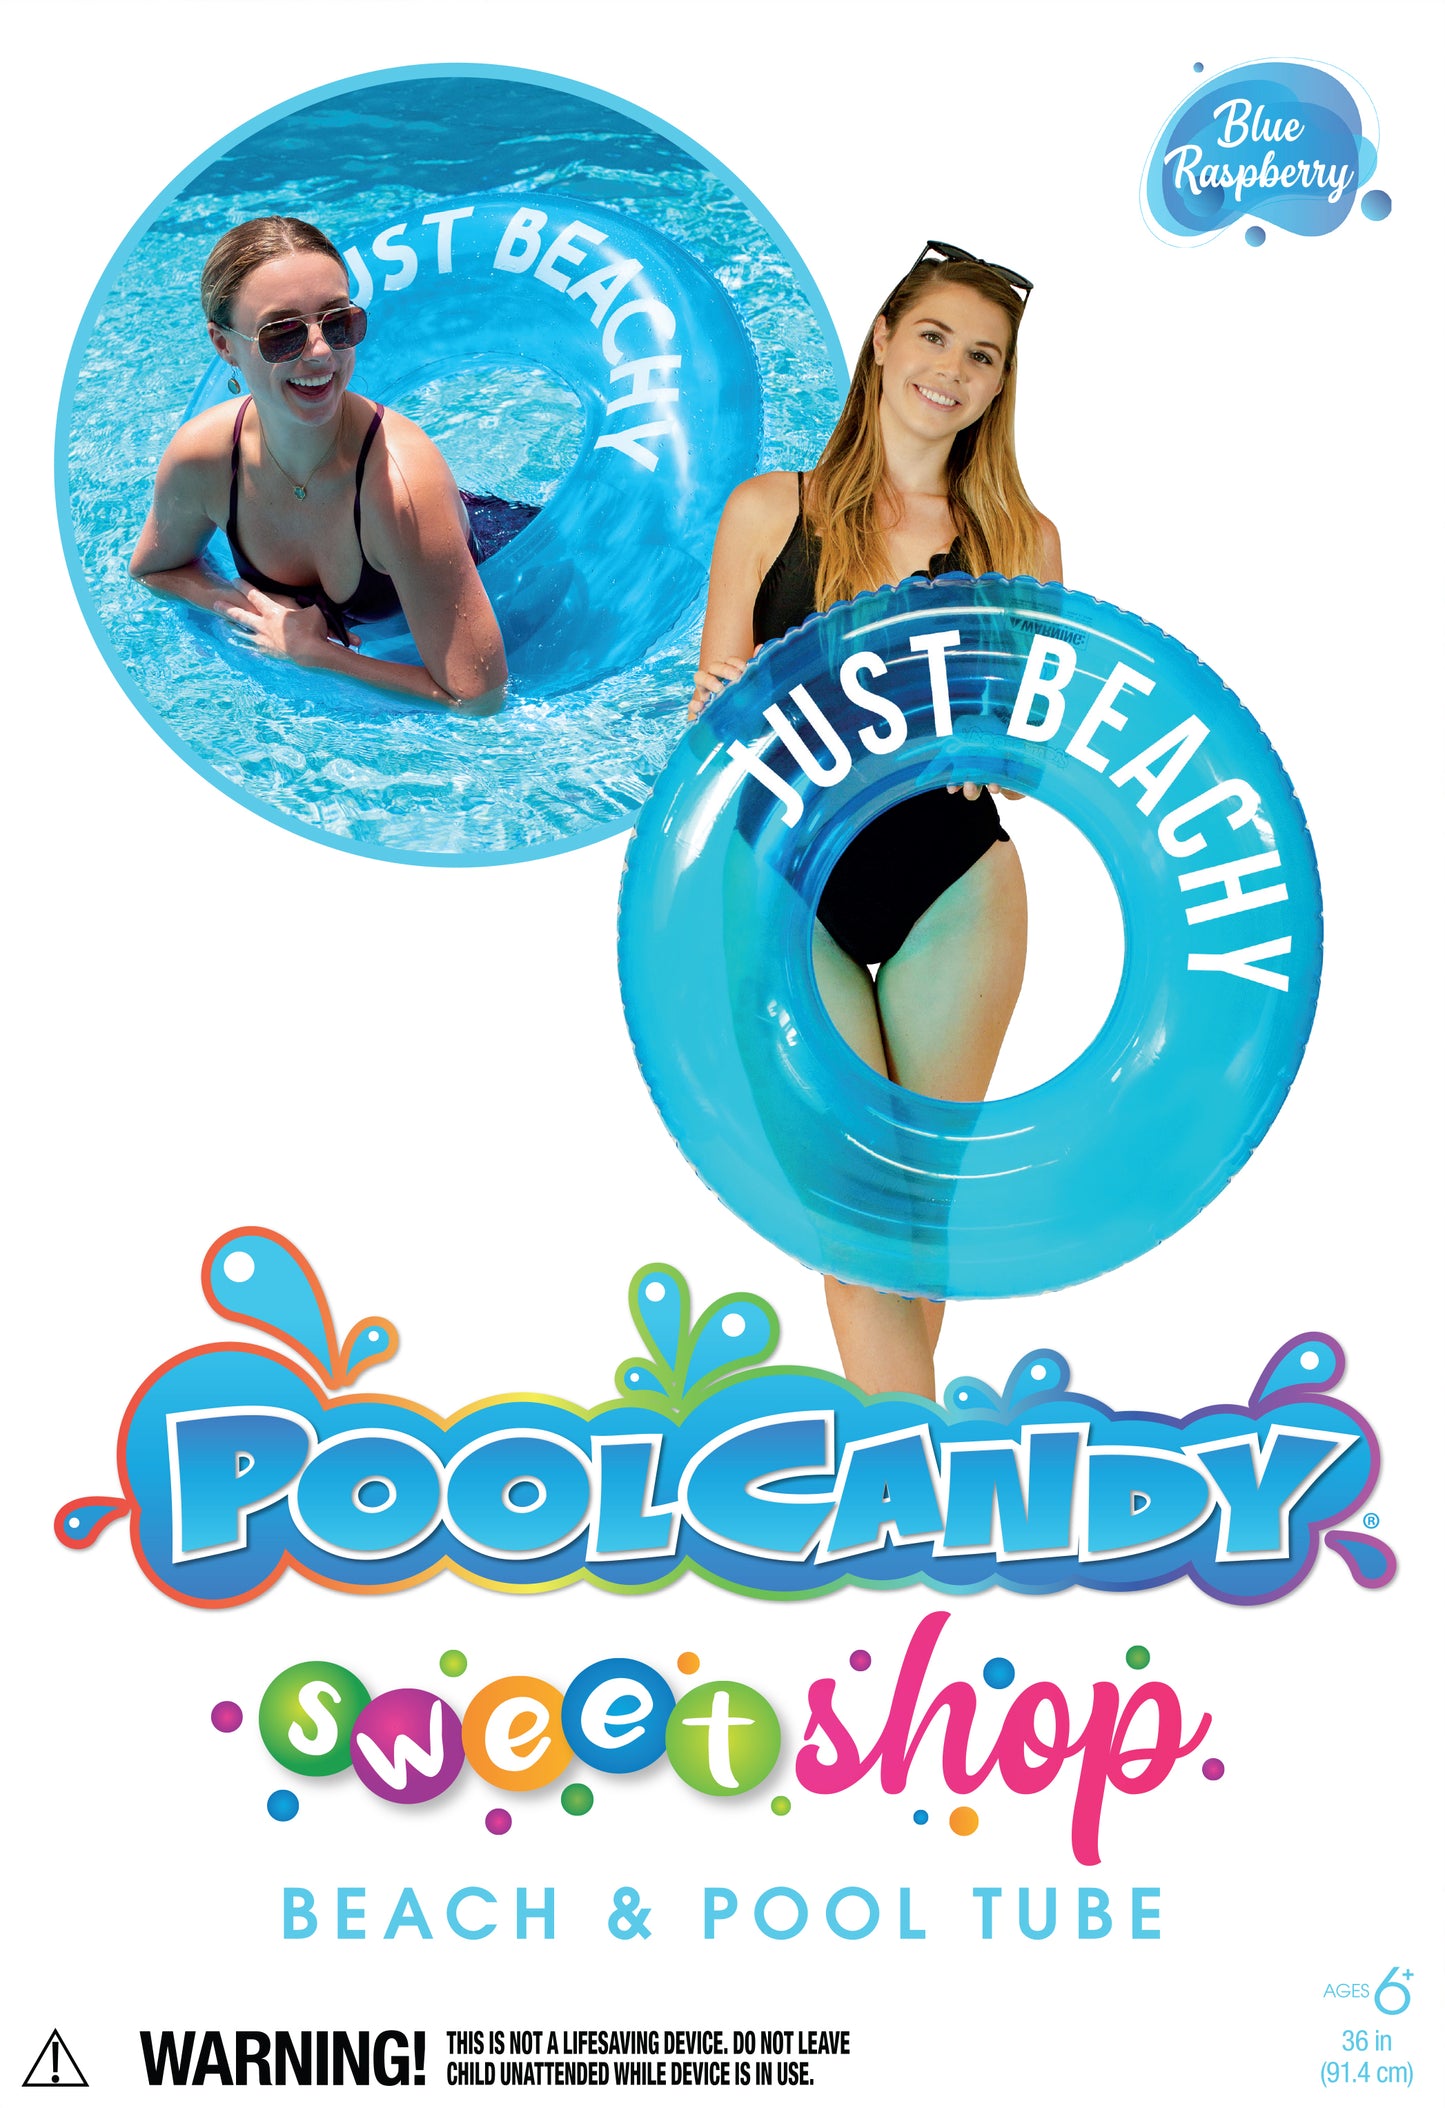 Experience endless fun in the sun with the Sweet Shop Blue Raspberry Inflatable Pool Tube - a durable, comfortable, and versatile swim ring for all ages.